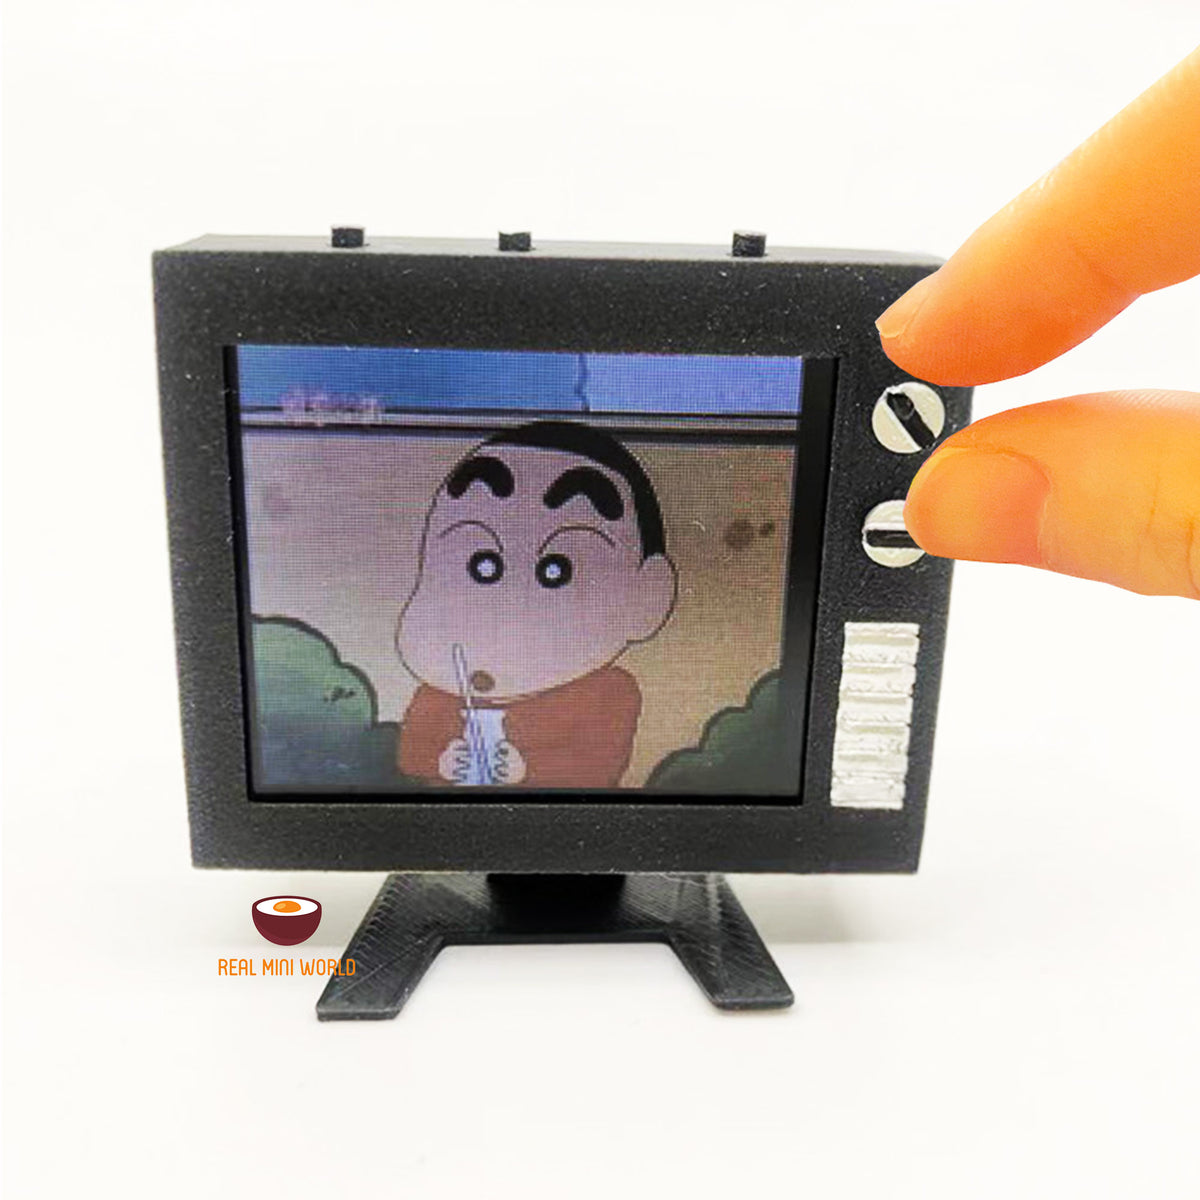 Miniature Real Working Television TV Set: Watch Real Movie